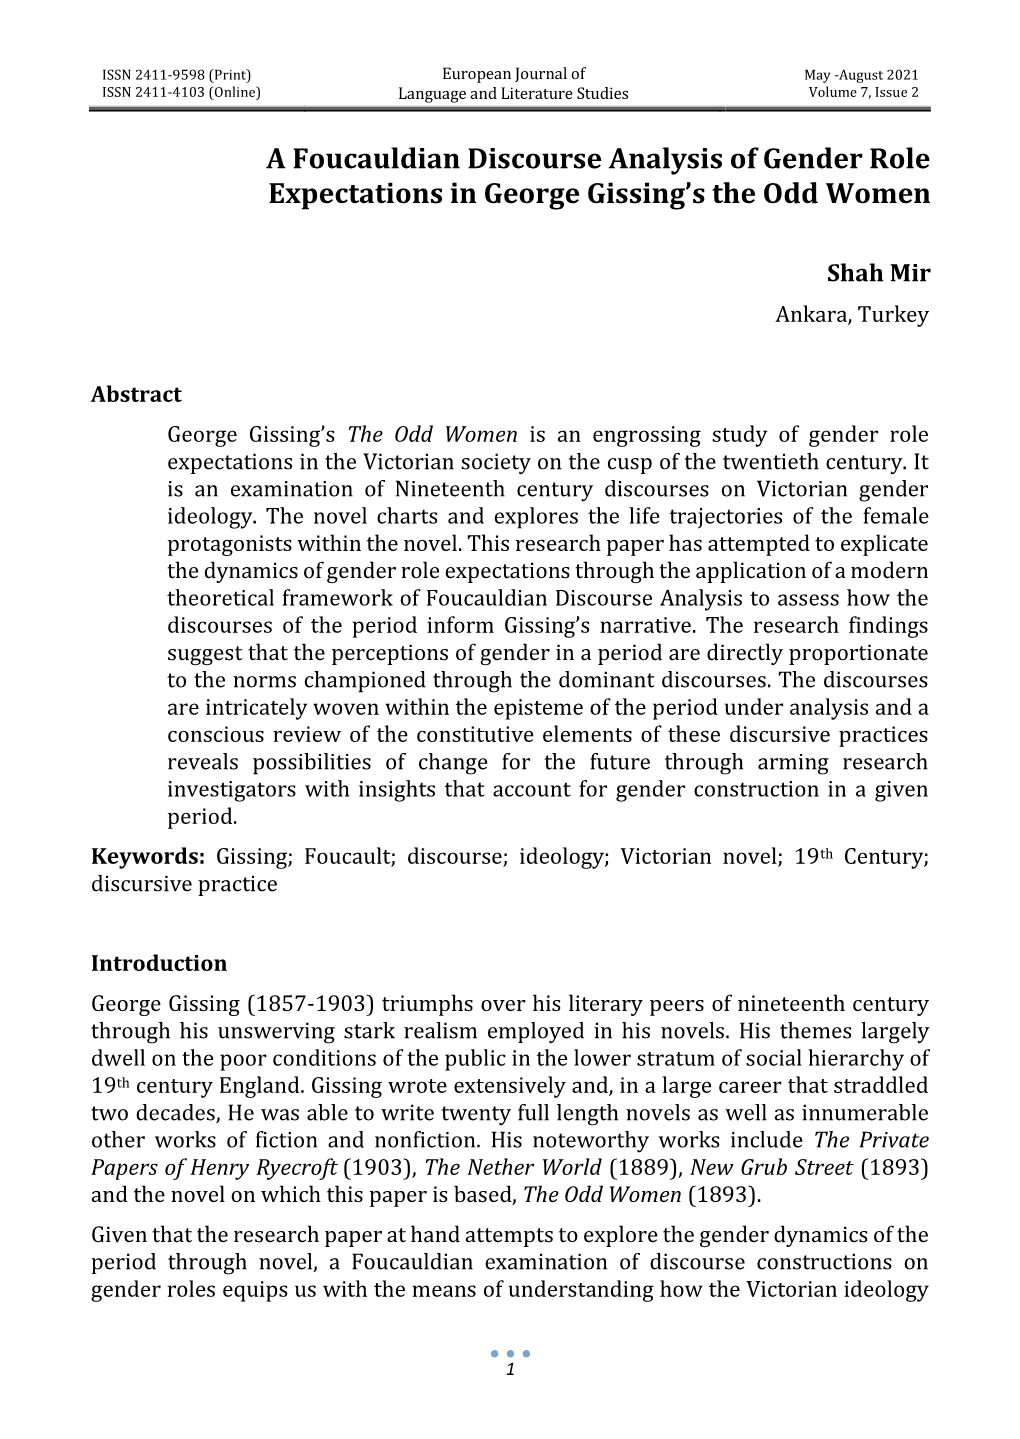 A Foucauldian Discourse Analysis of Gender Role Expectations in George Gissing’S the Odd Women